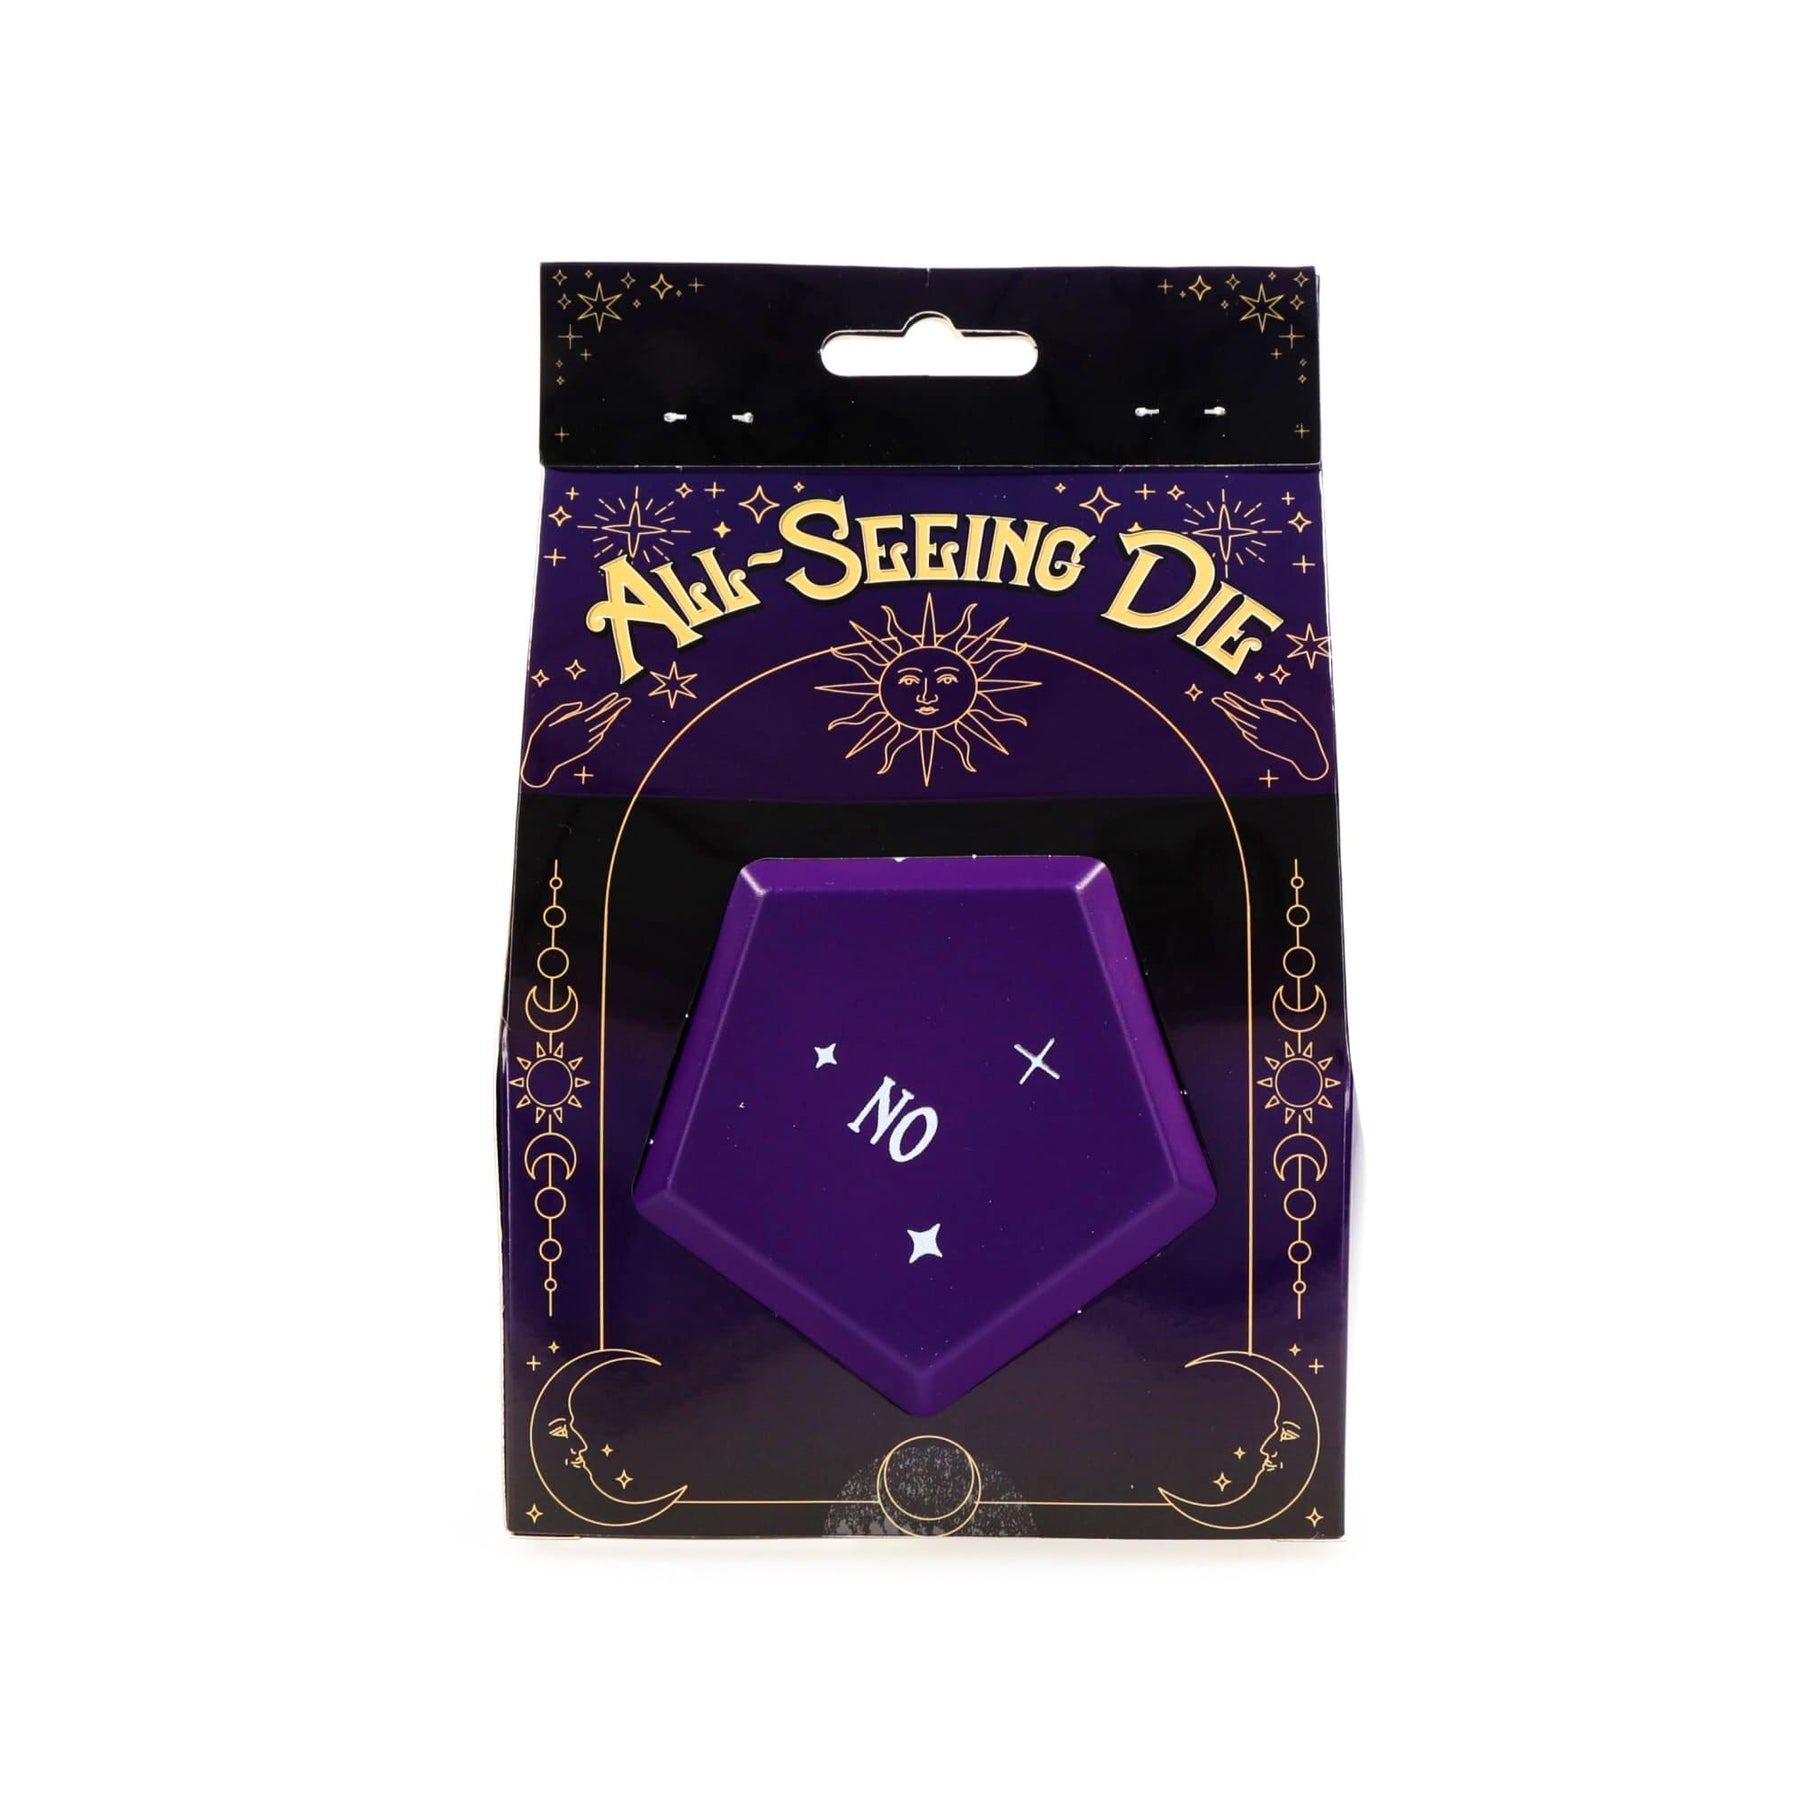 All-Seeing Dice Large Foam Dice Rolling Game